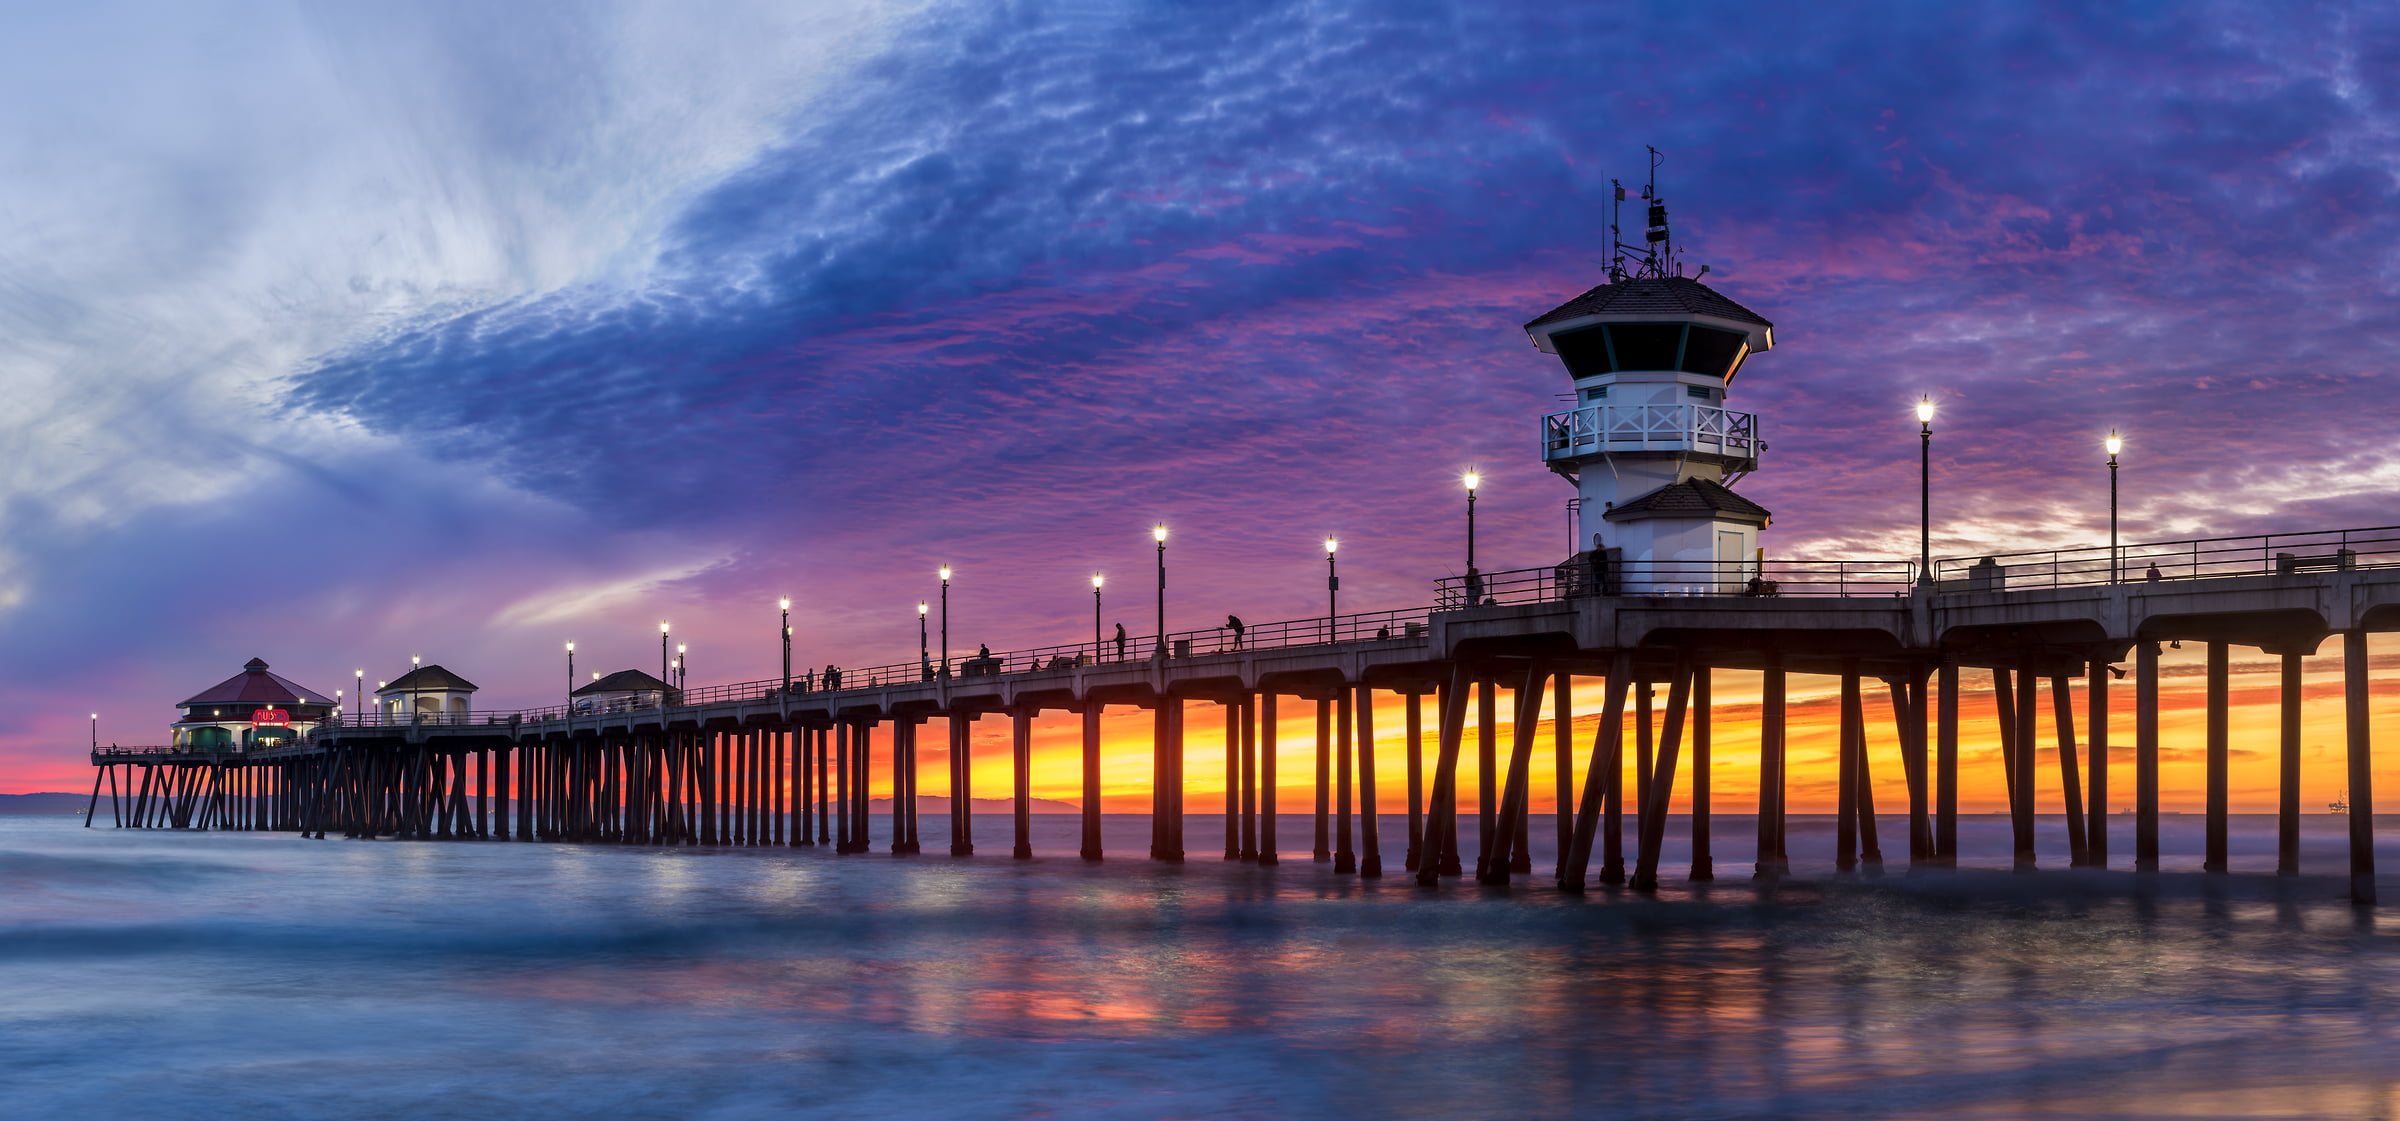 130 megapixels! A very high resolution, large-format VAST photo of the Huntington Beach Pier at sunset; created by Jim Tarpo in Huntington Beach, California